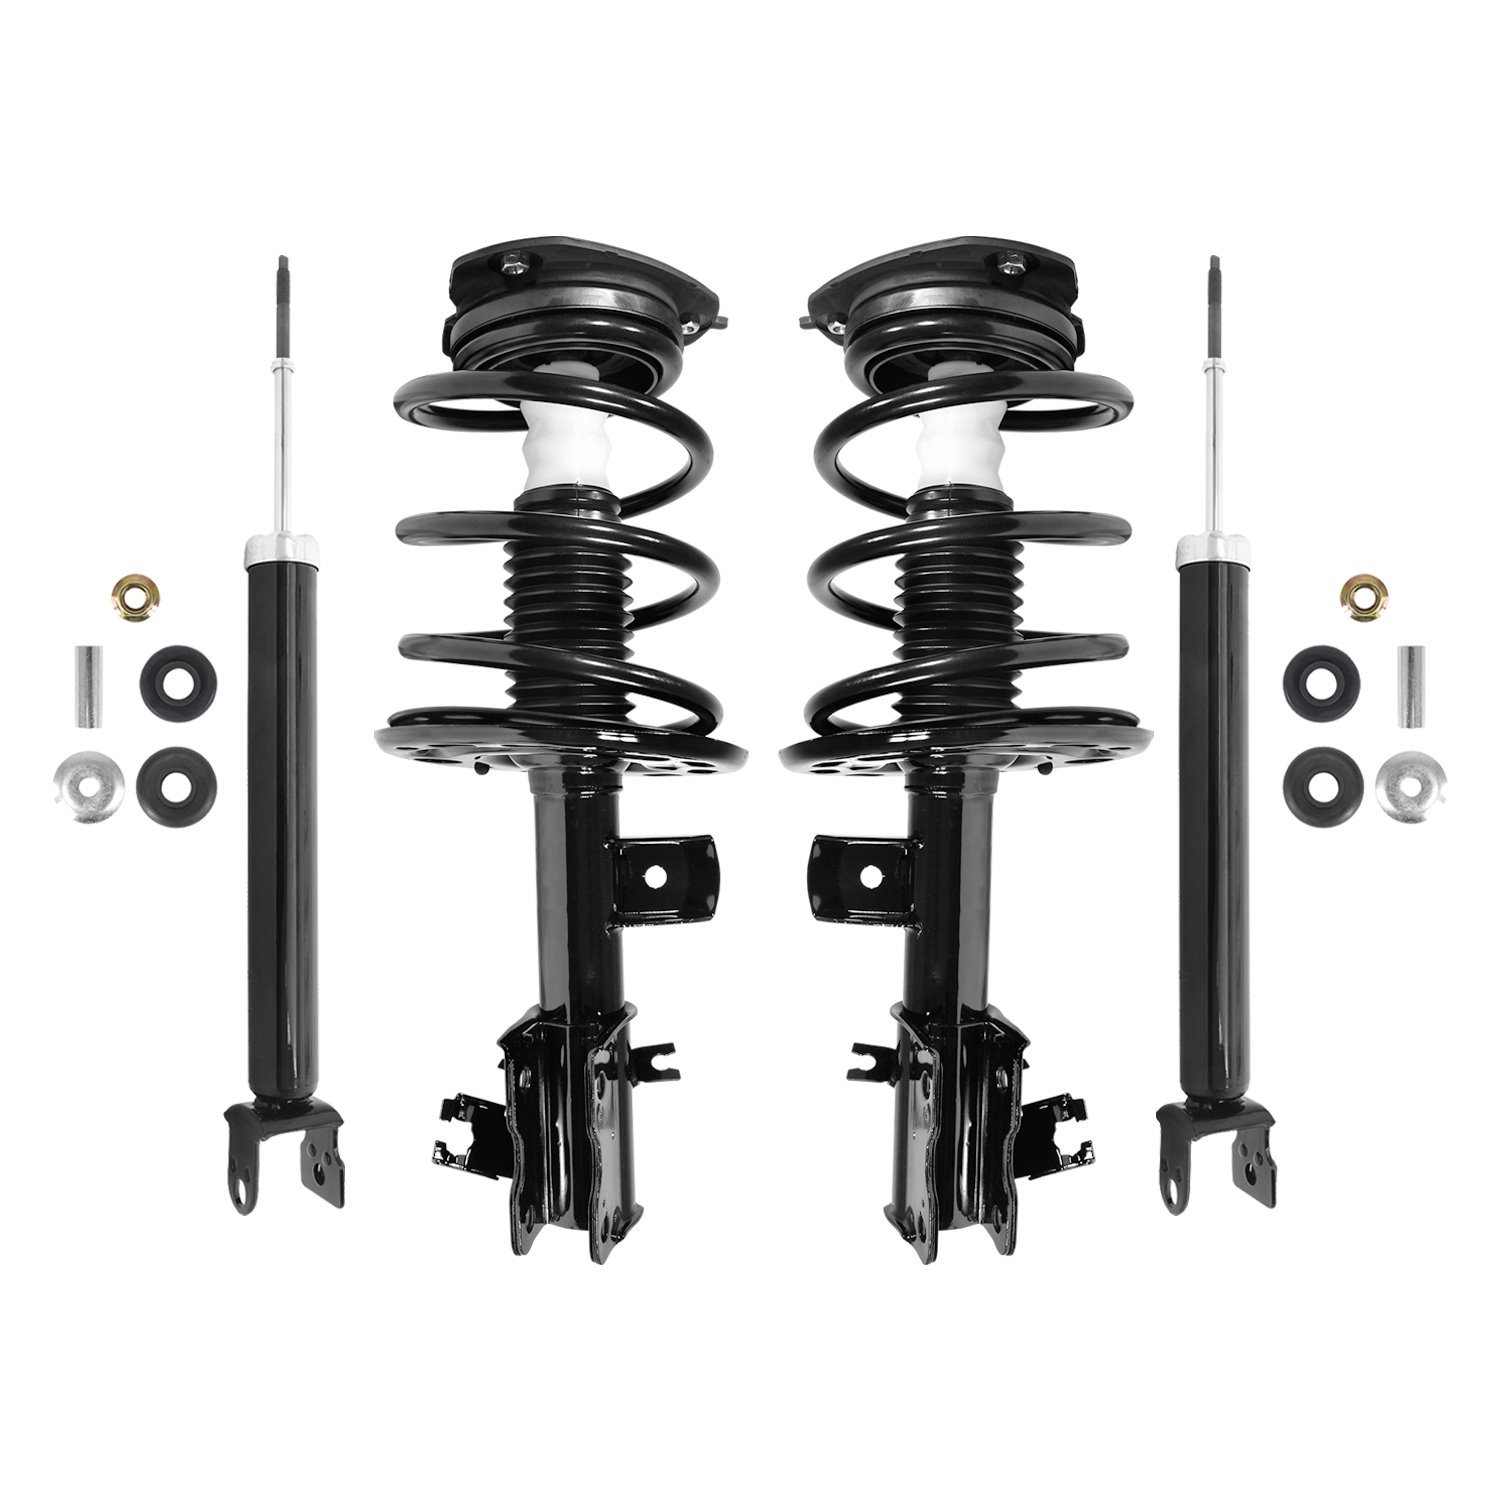 4-11611-255030-001 Front & Rear Suspension Strut & Coil Spring Assembly Fits Select Nissan Altima